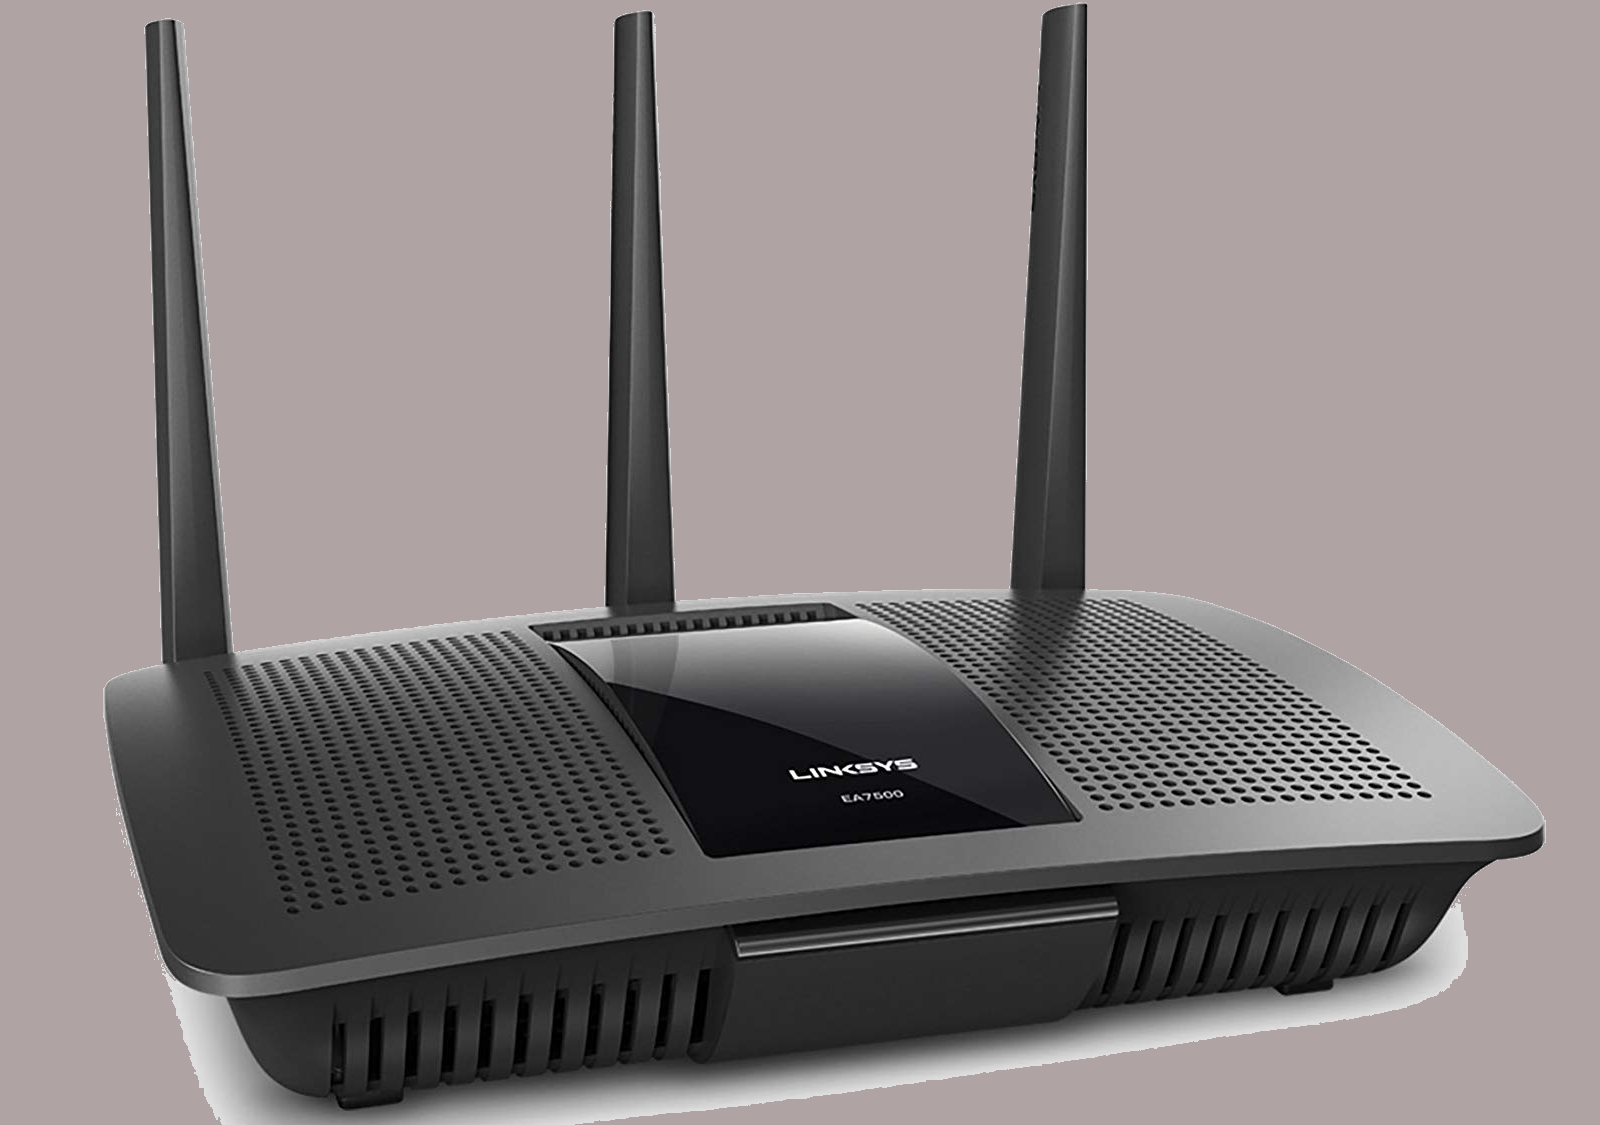 amazon slashes prices on linksys dual band and tri mesh wi fi routers the router 01  1